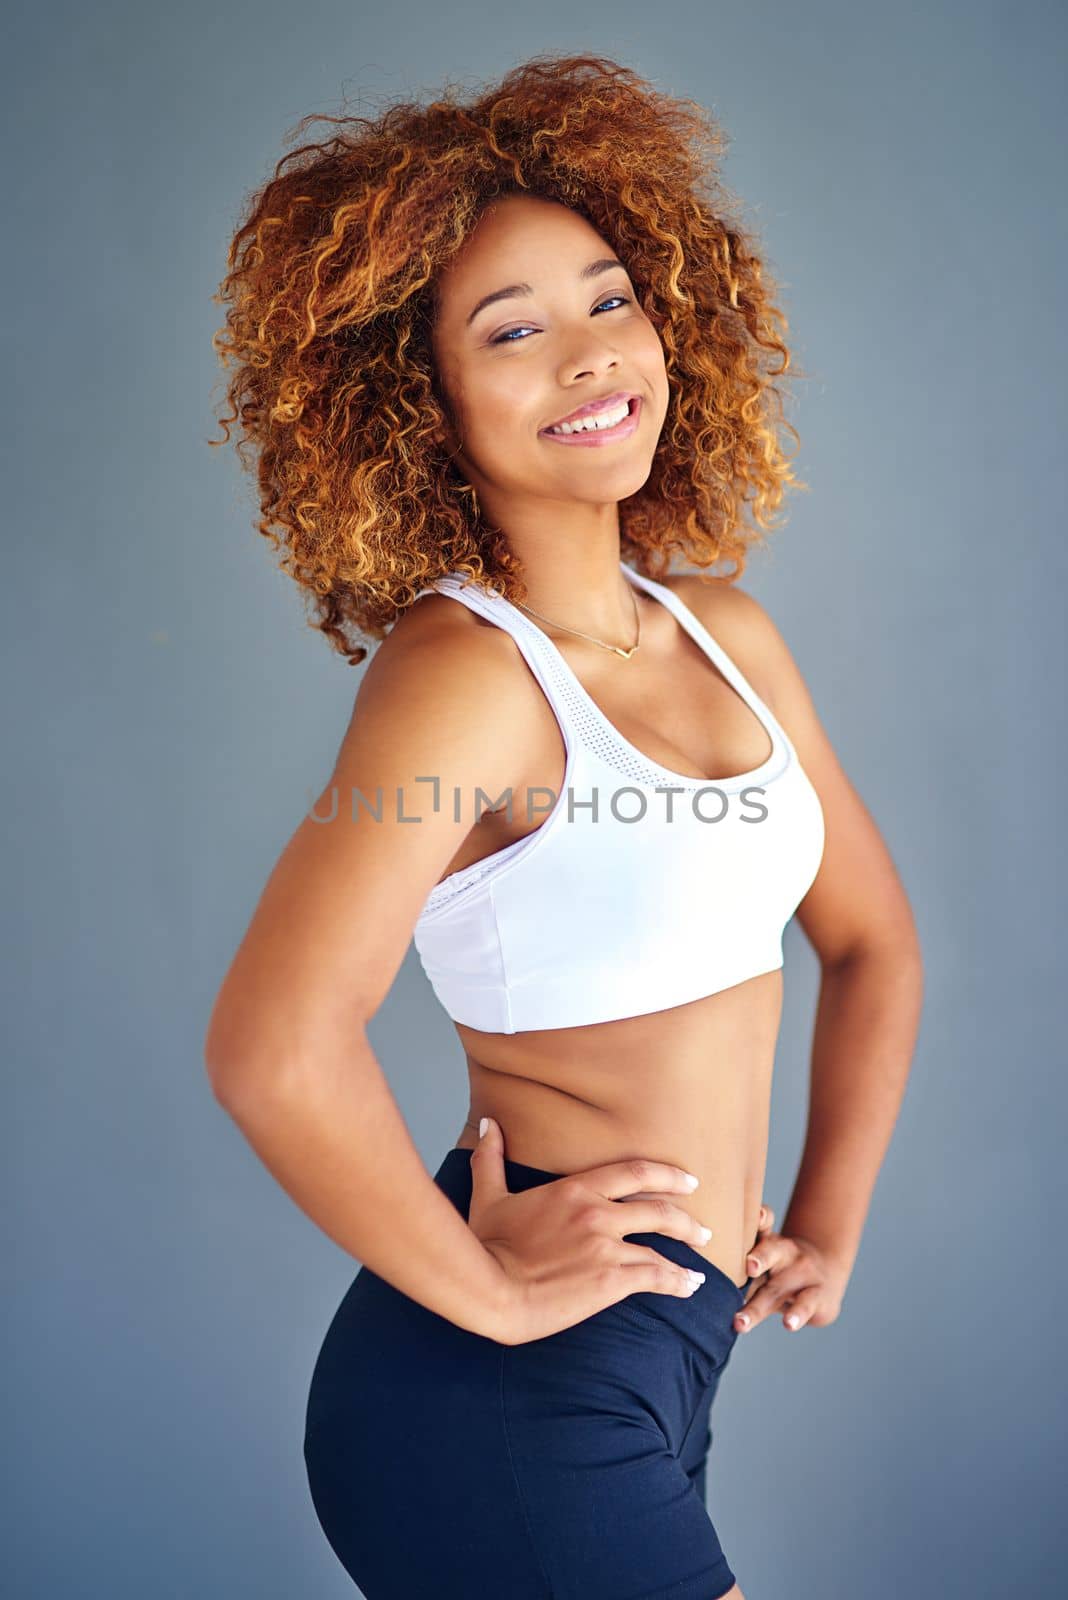 Today is another chance to make yourself proud. a sporty young woman posing against a grey background